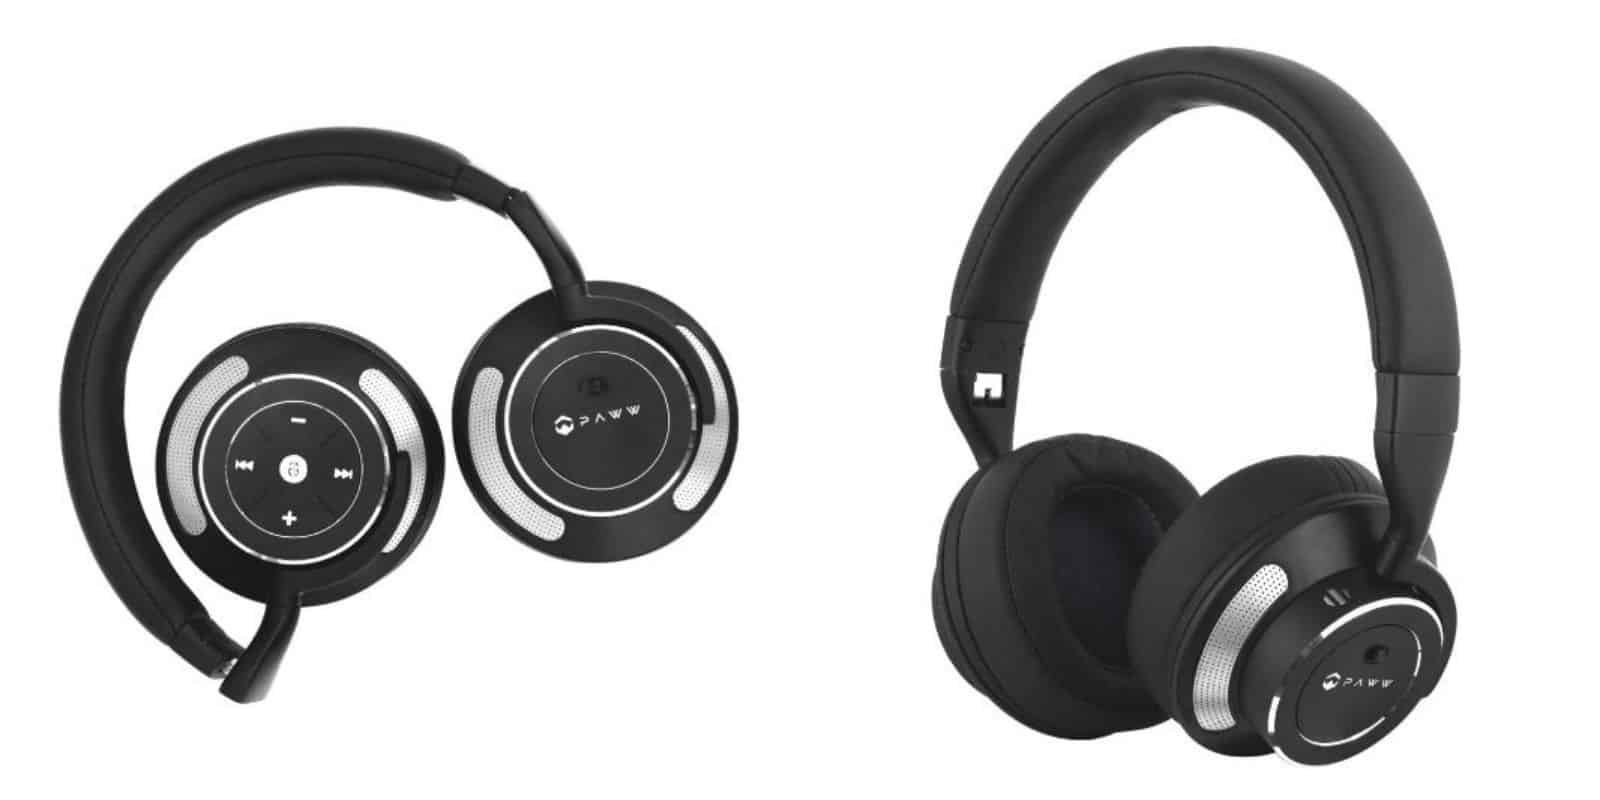 These headphones sport premium noise cancellation, Bluetooth convenience, and awesome sound quality.